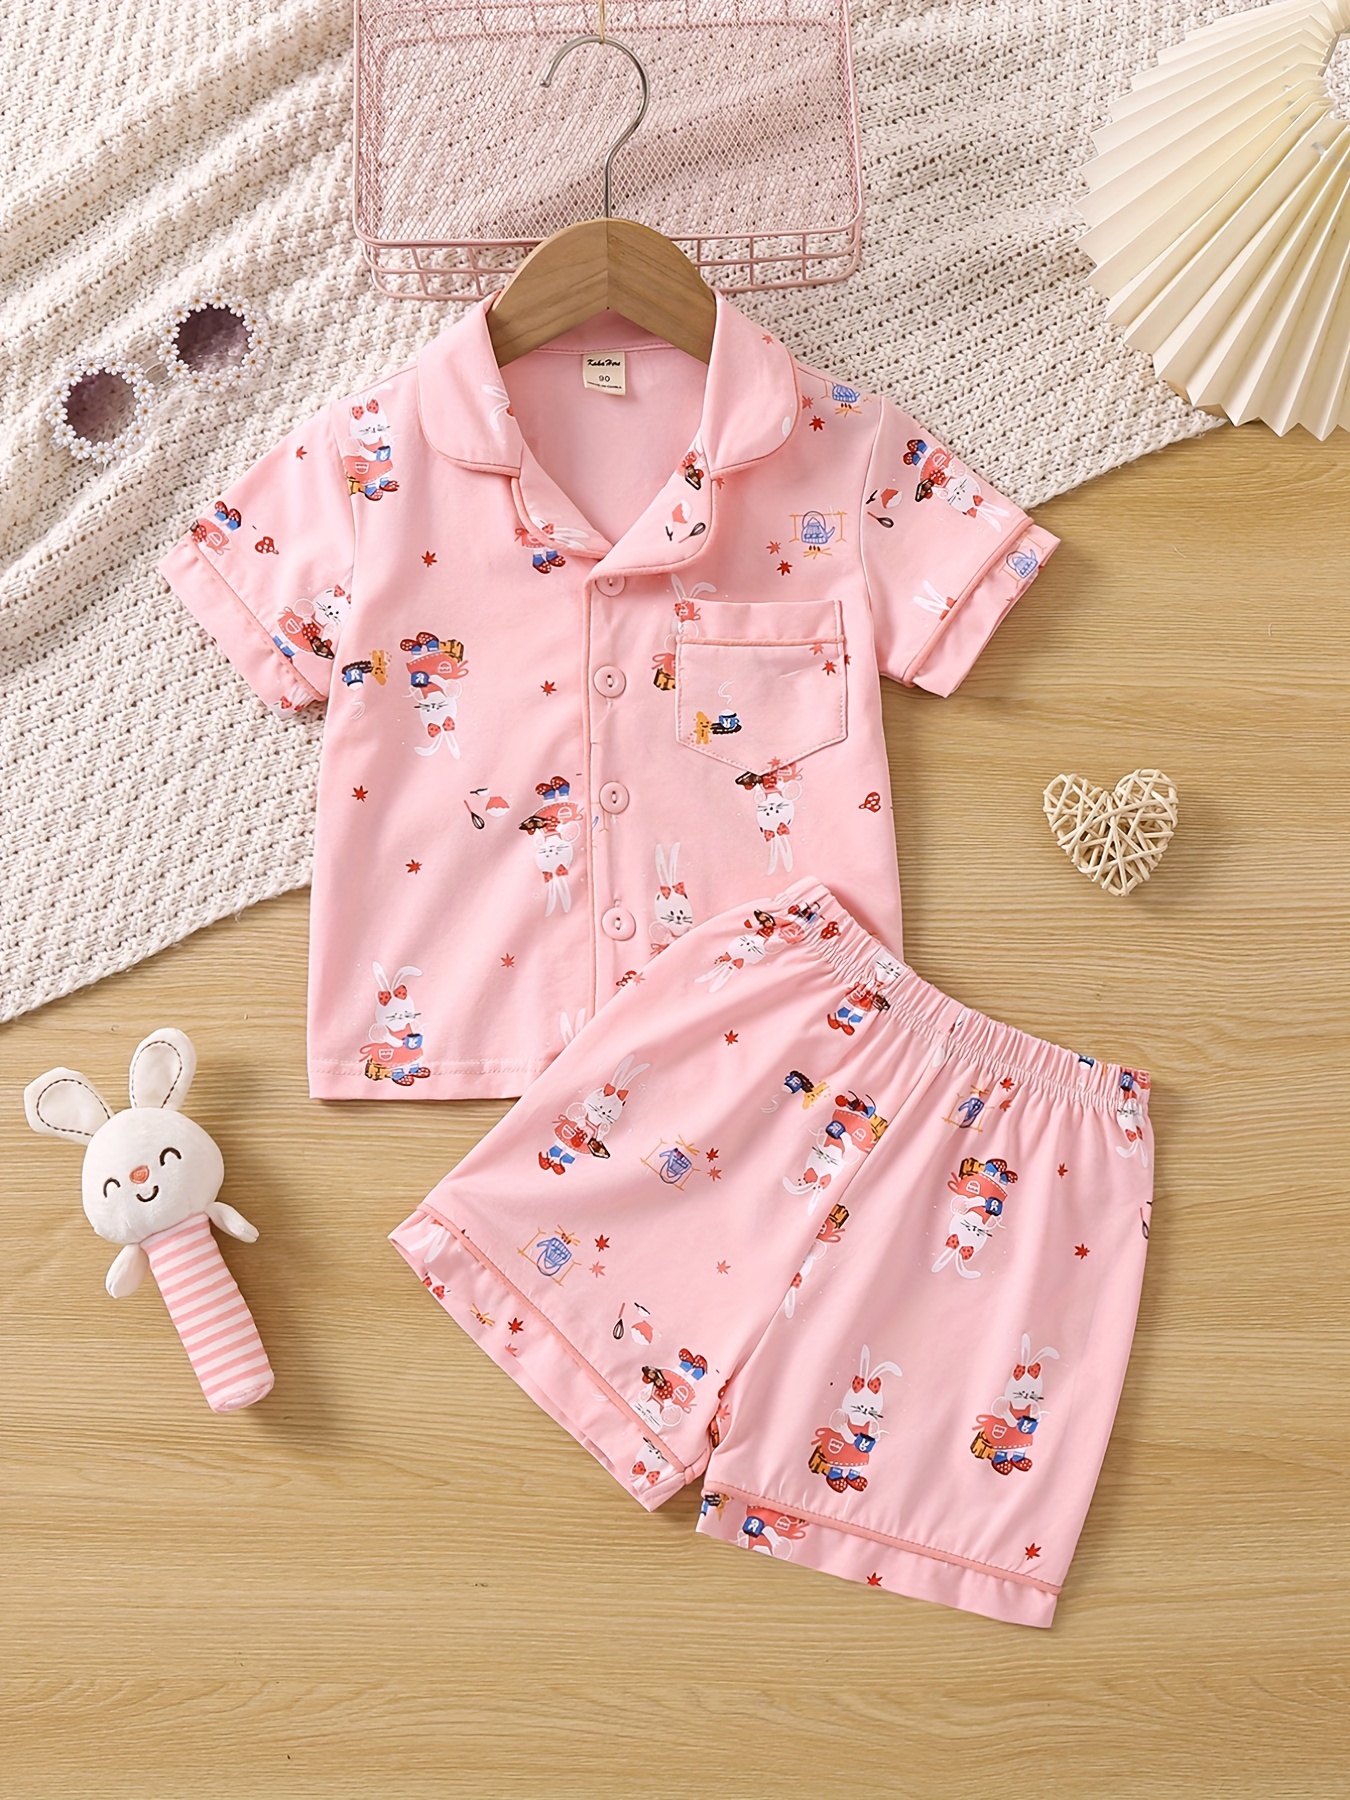 Summer Pajamas and Loungewear - Cute and Comfortable! - Welcome